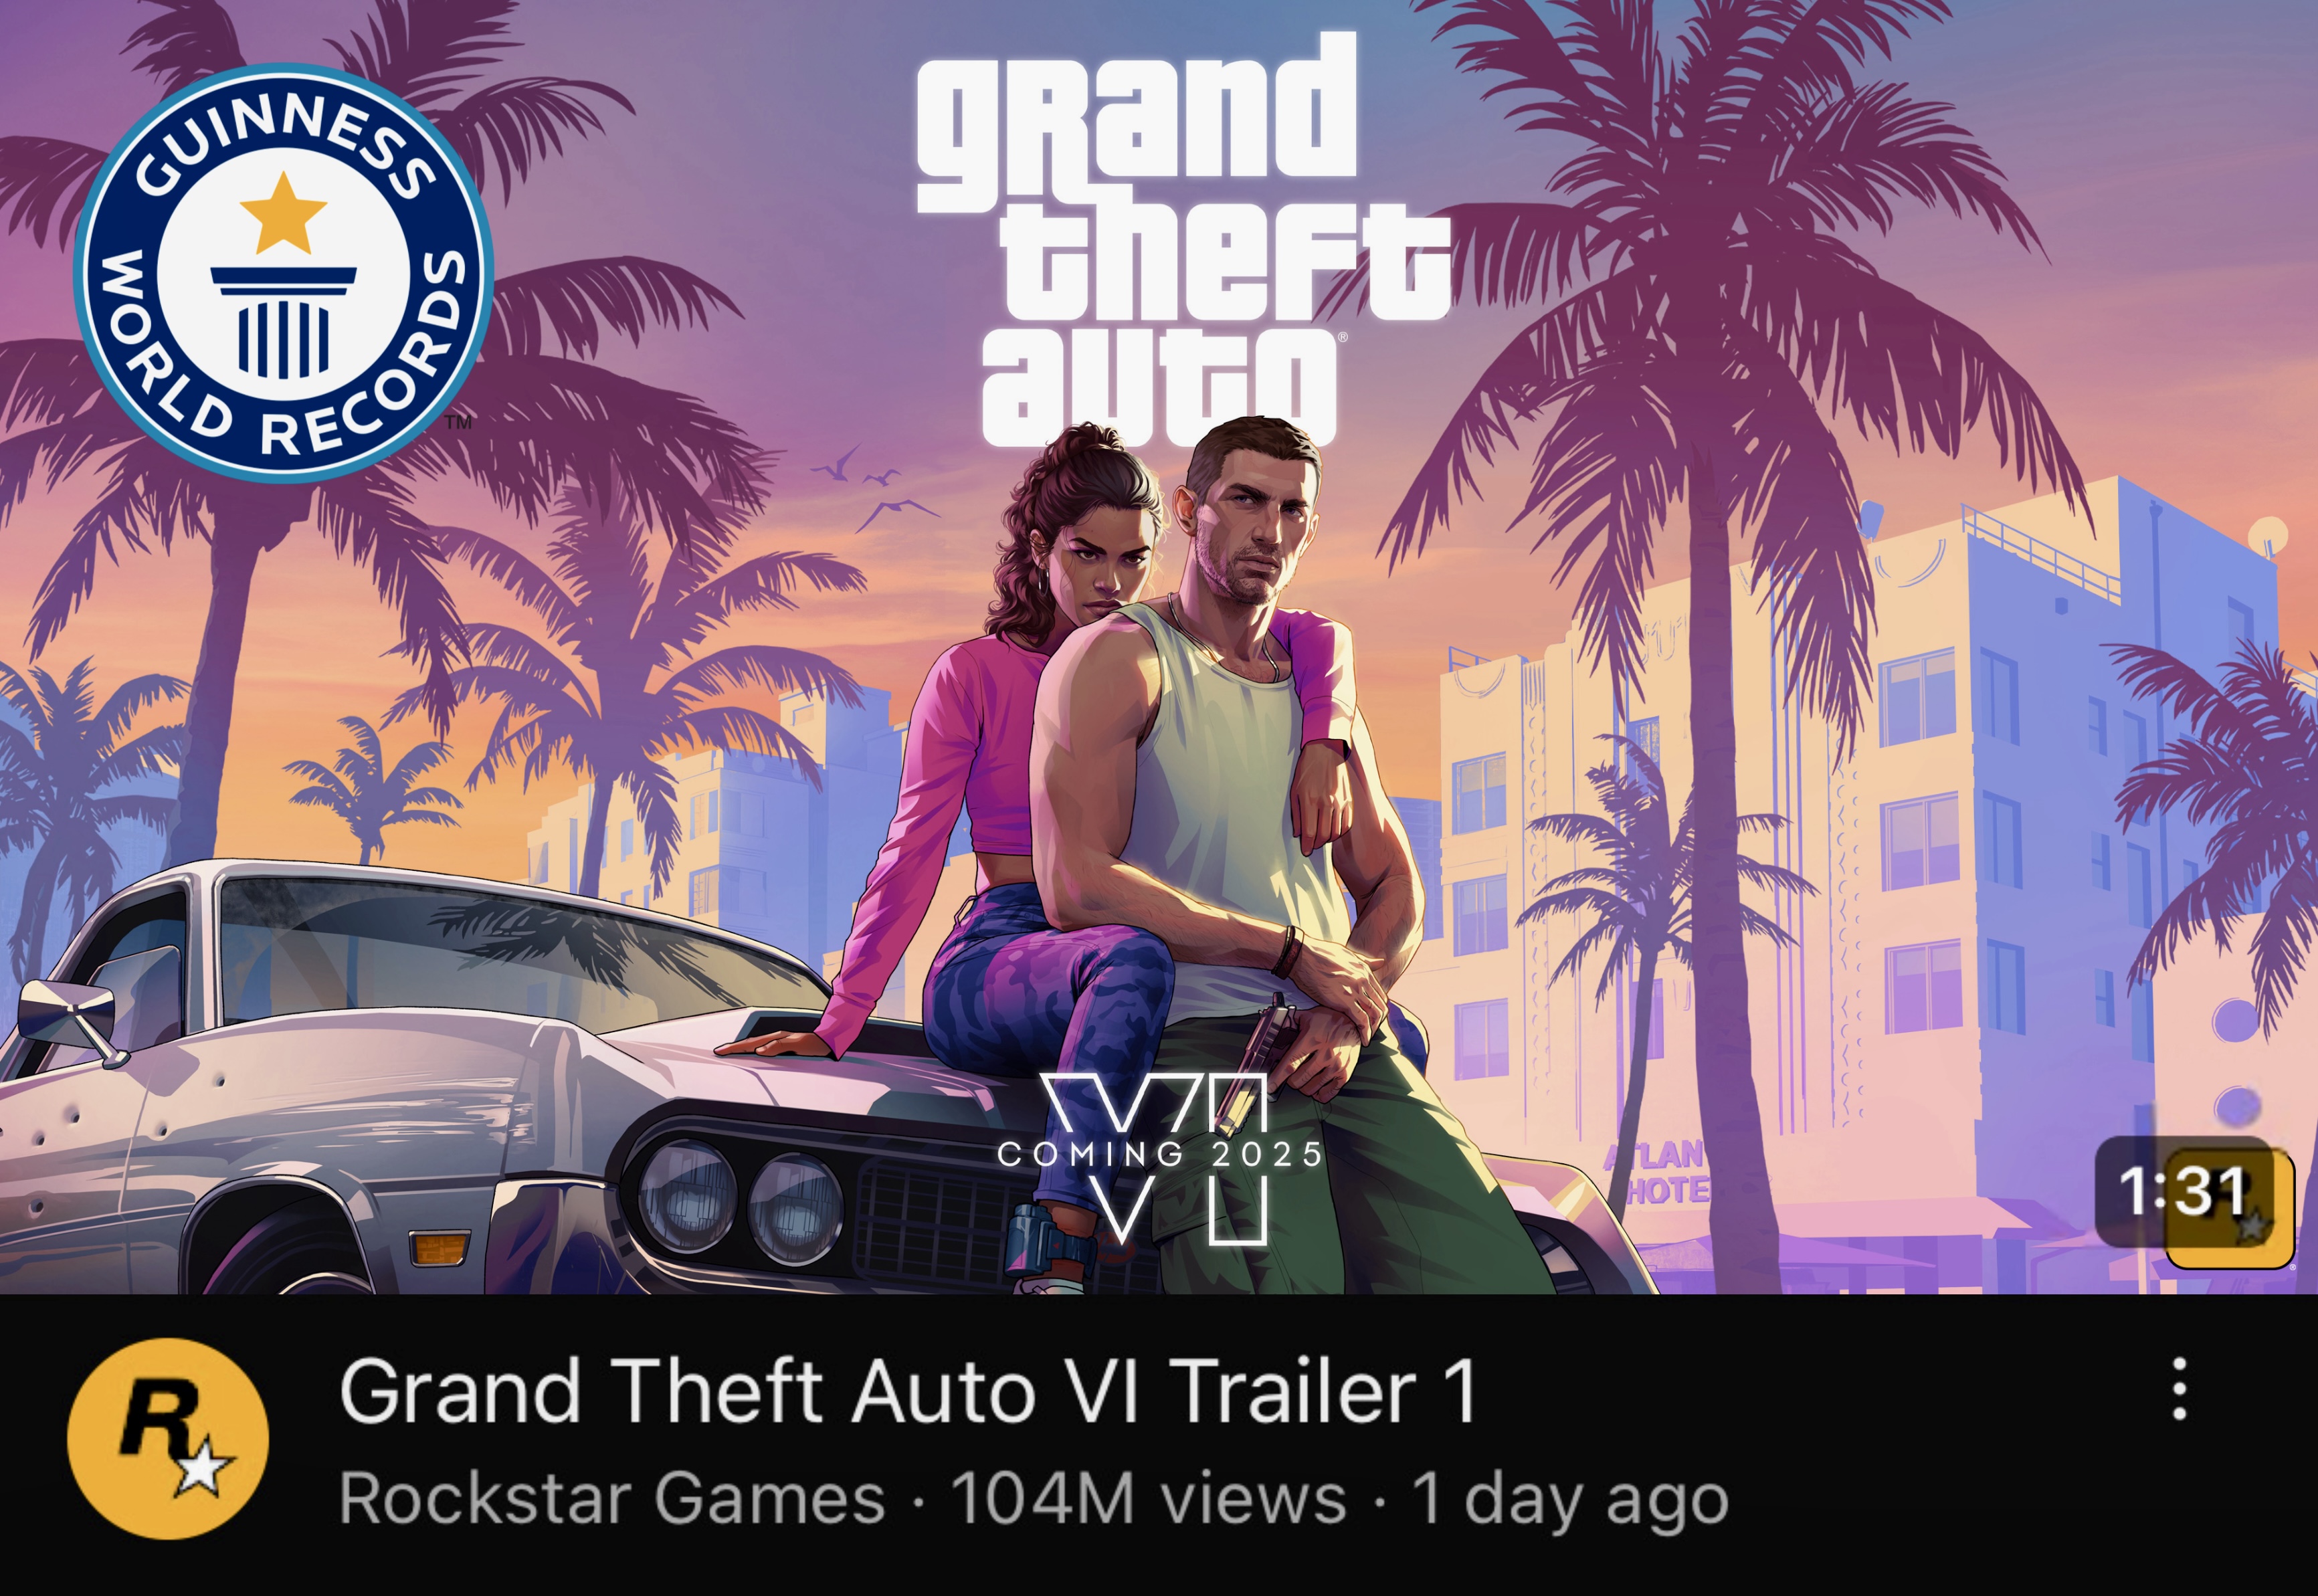 GTA 6 Trailer Countdown ⏳ on X: GTA 6 is already breaking records. -  Trending #1 in 14 countries and worldwide. - The announcement is now the  most liked gaming tweet of